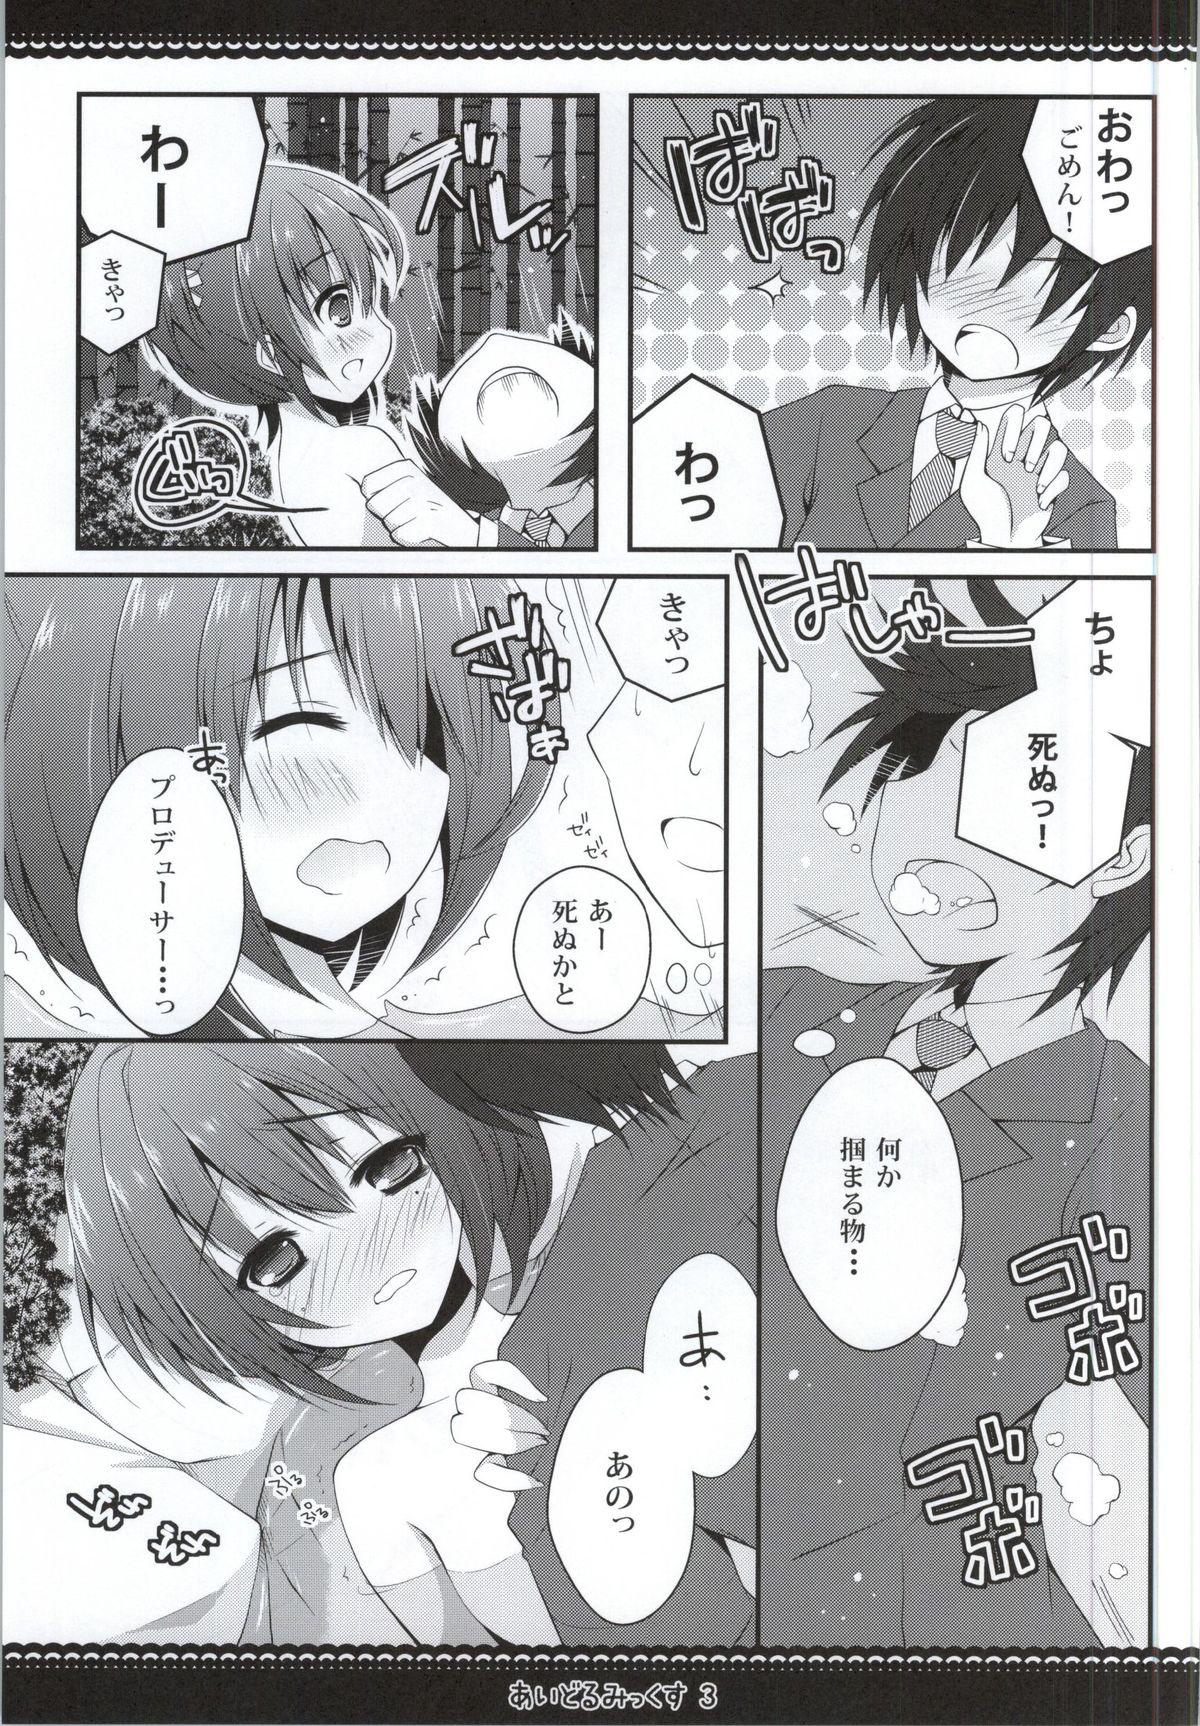 Romantic Idolmix 3 - The idolmaster Gays - Page 8